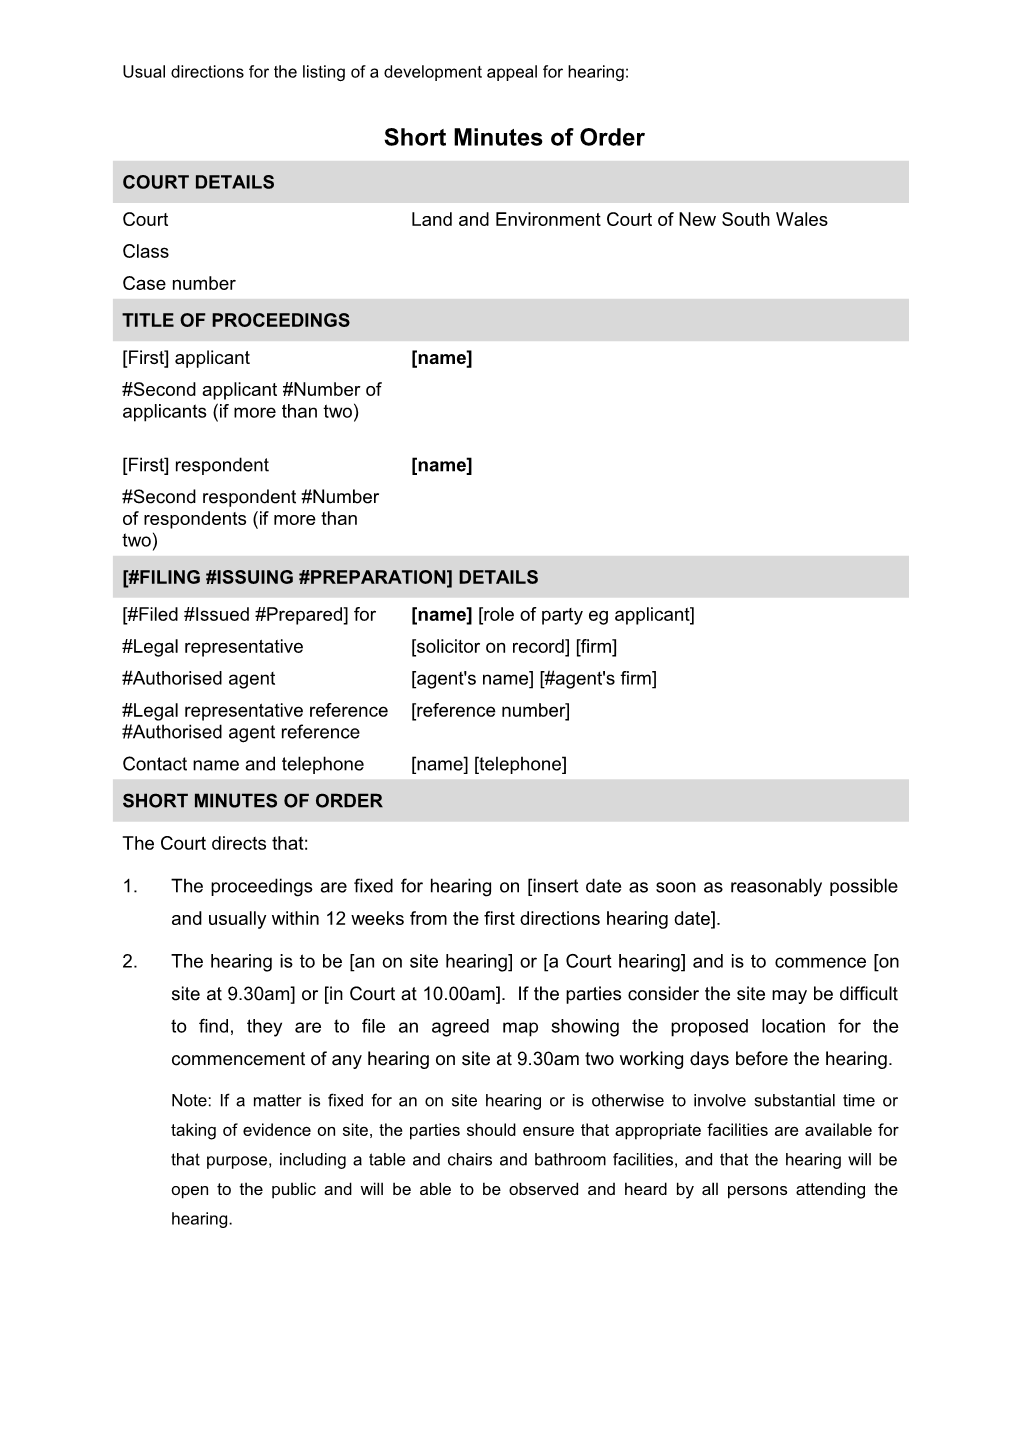 NSW LEC Form a - General Form (Land and Environment Court)